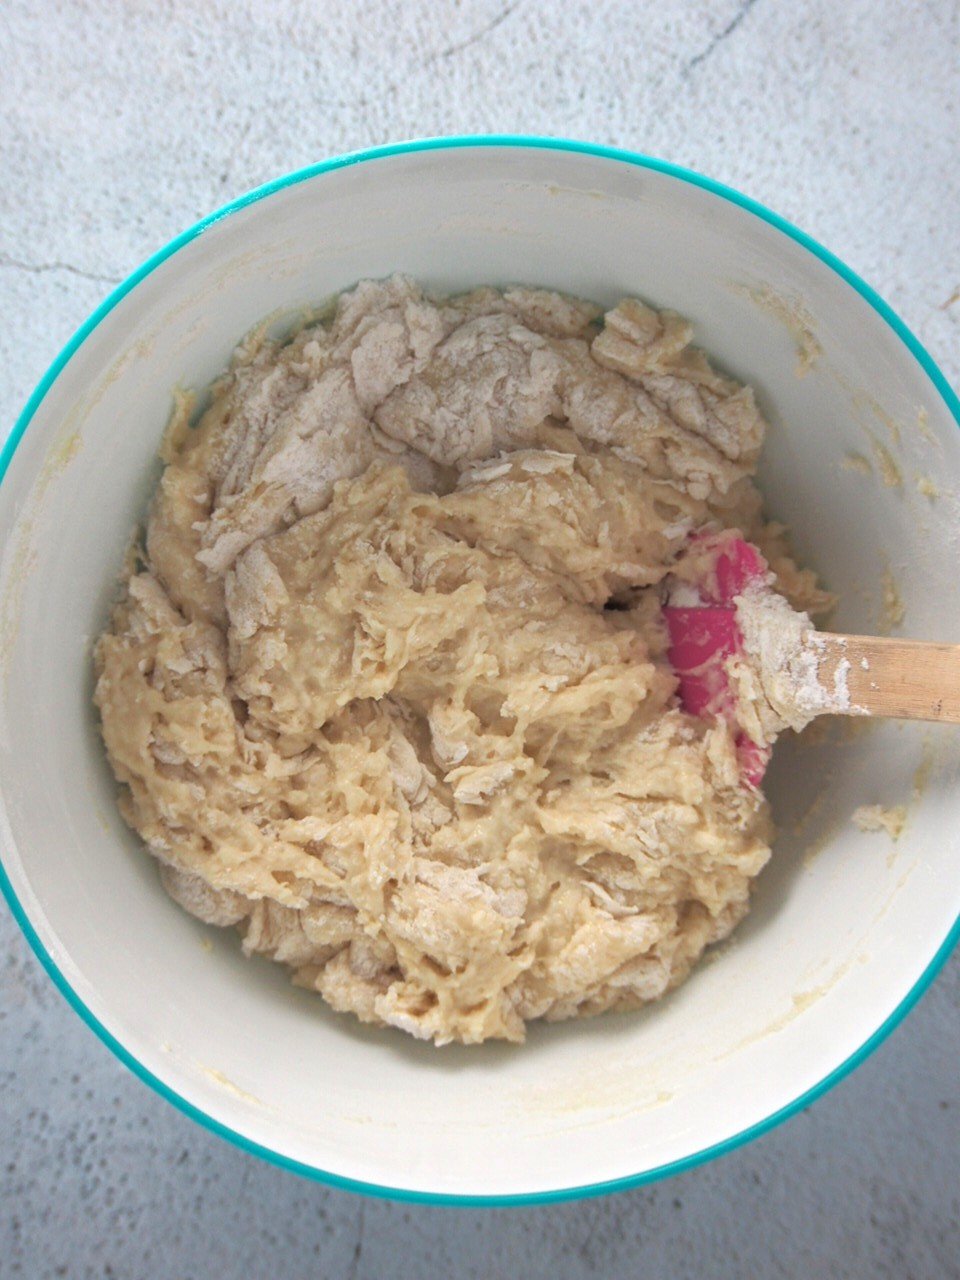 Mixing the mallorca dough ingredients in a bowl.